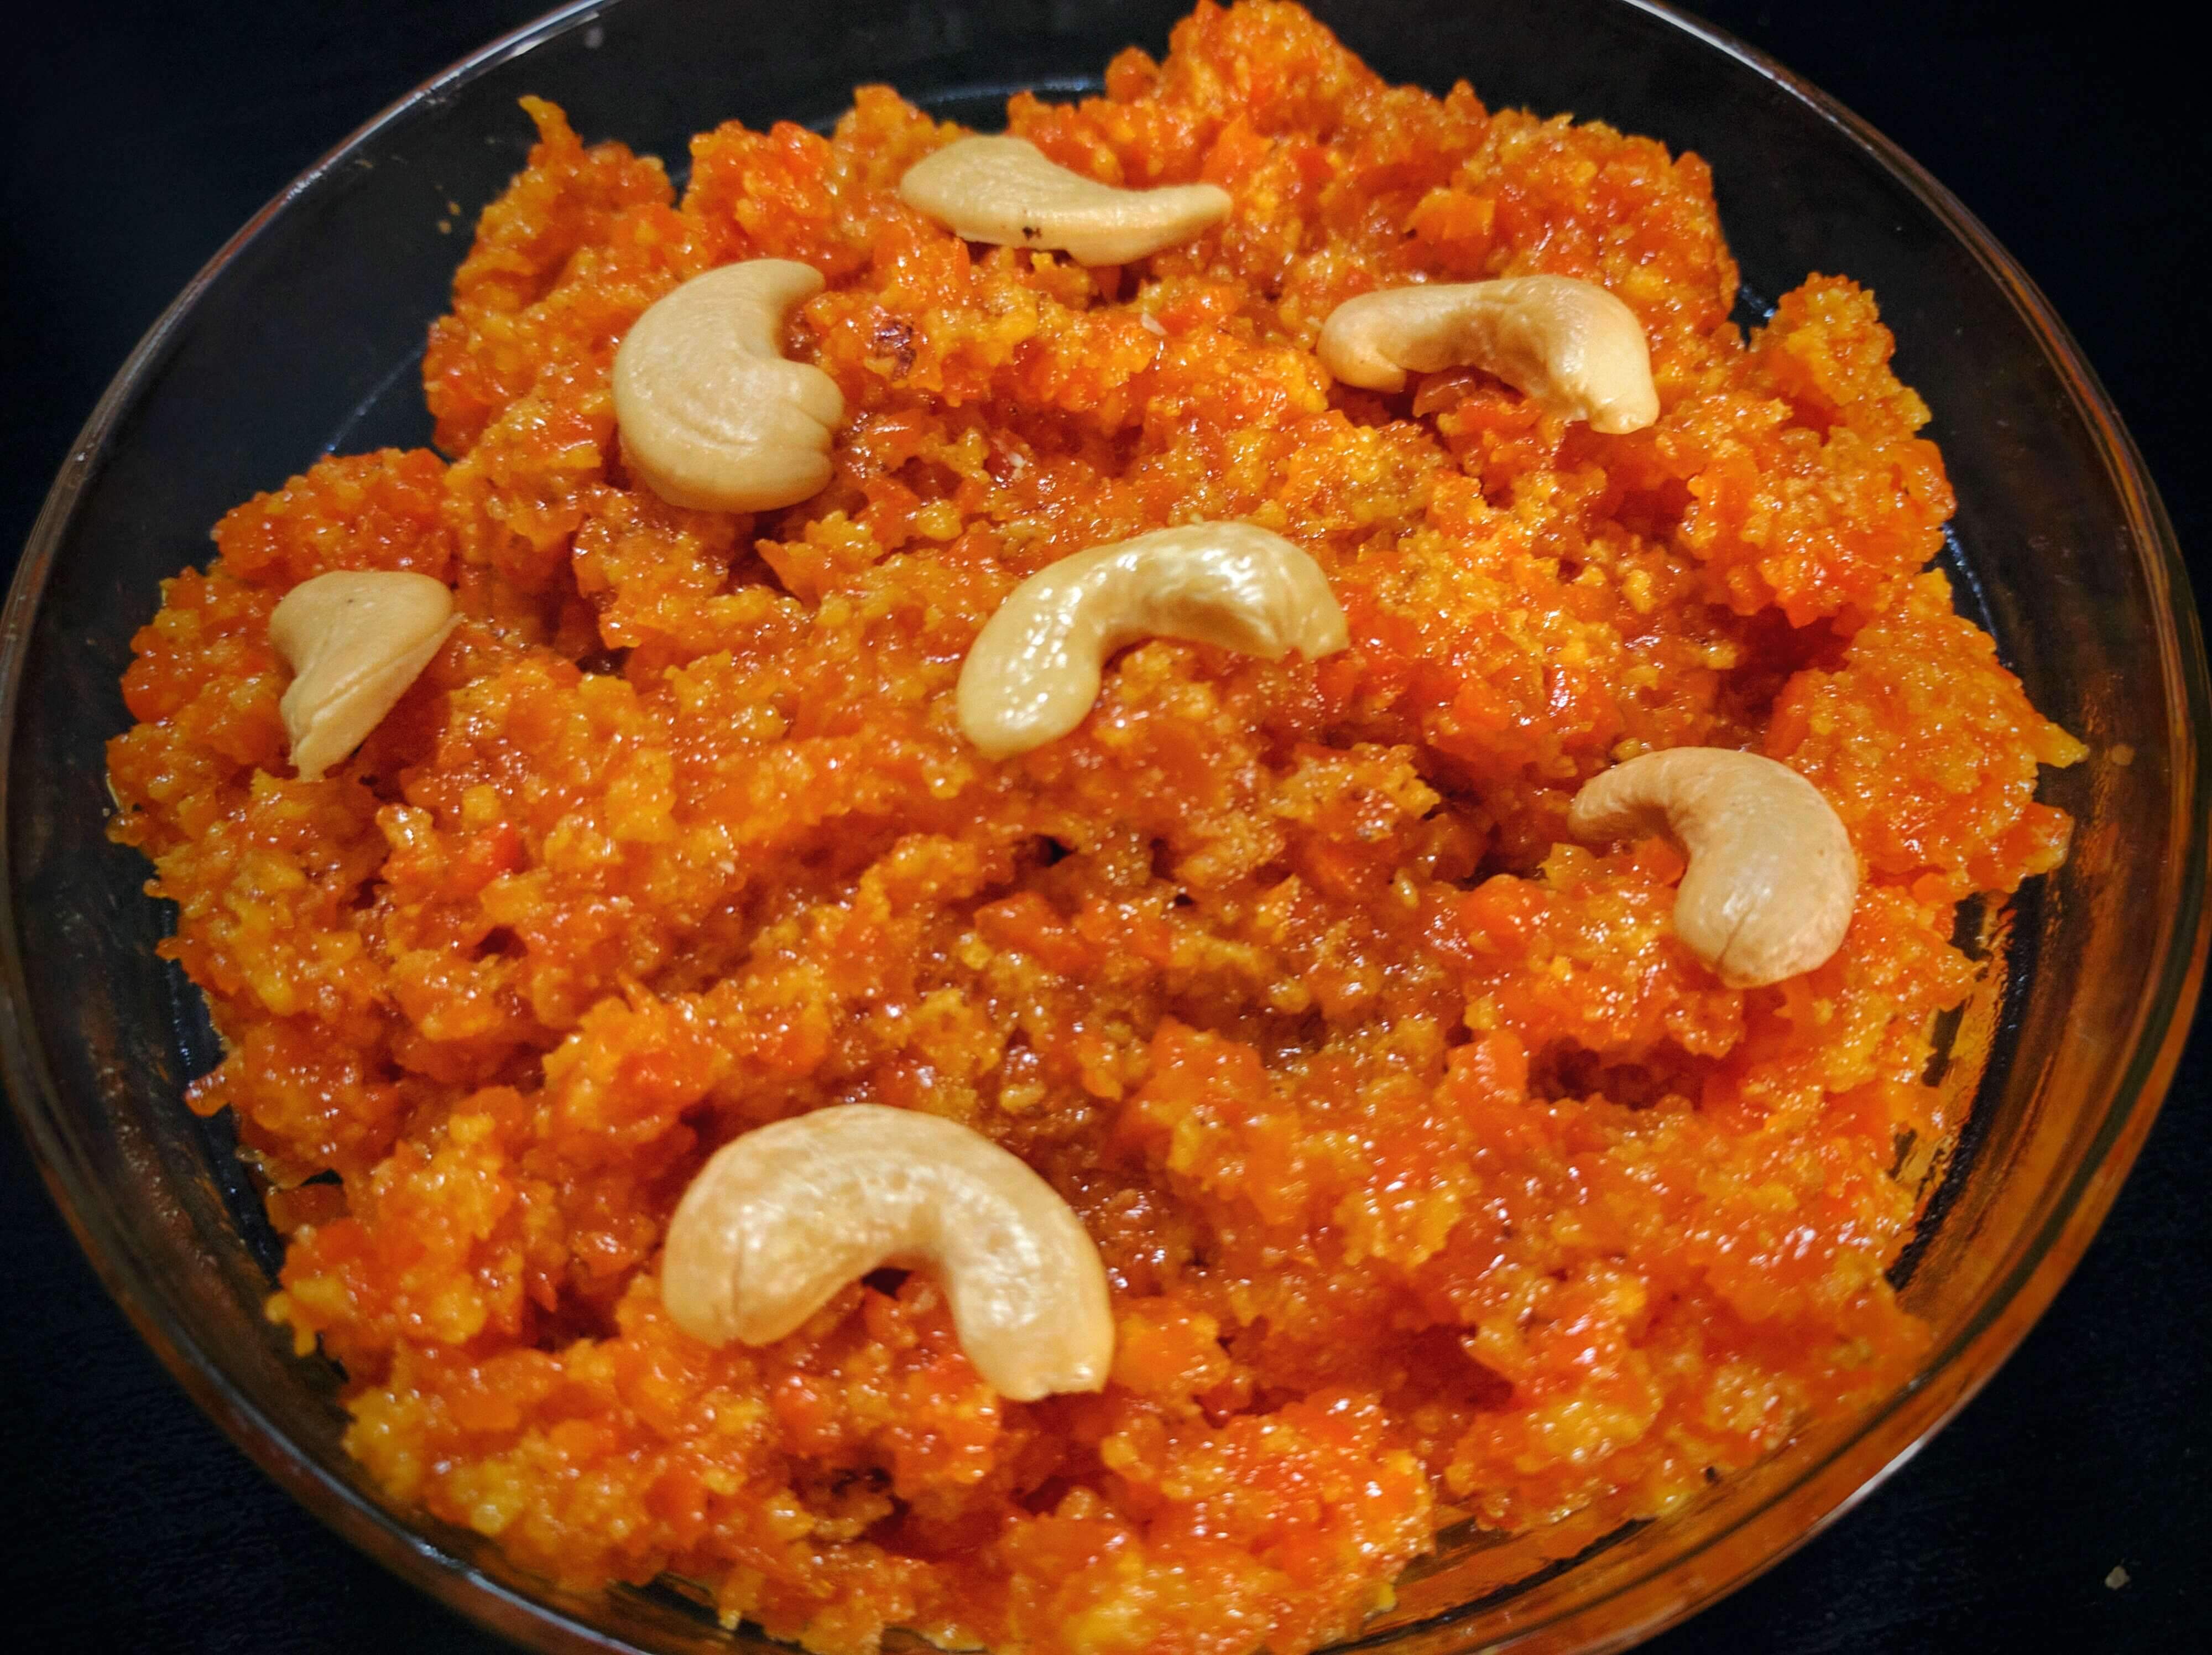 Grated carrots cooked in milk and sugar flavored with cardamom and garnished with raisins & nuts